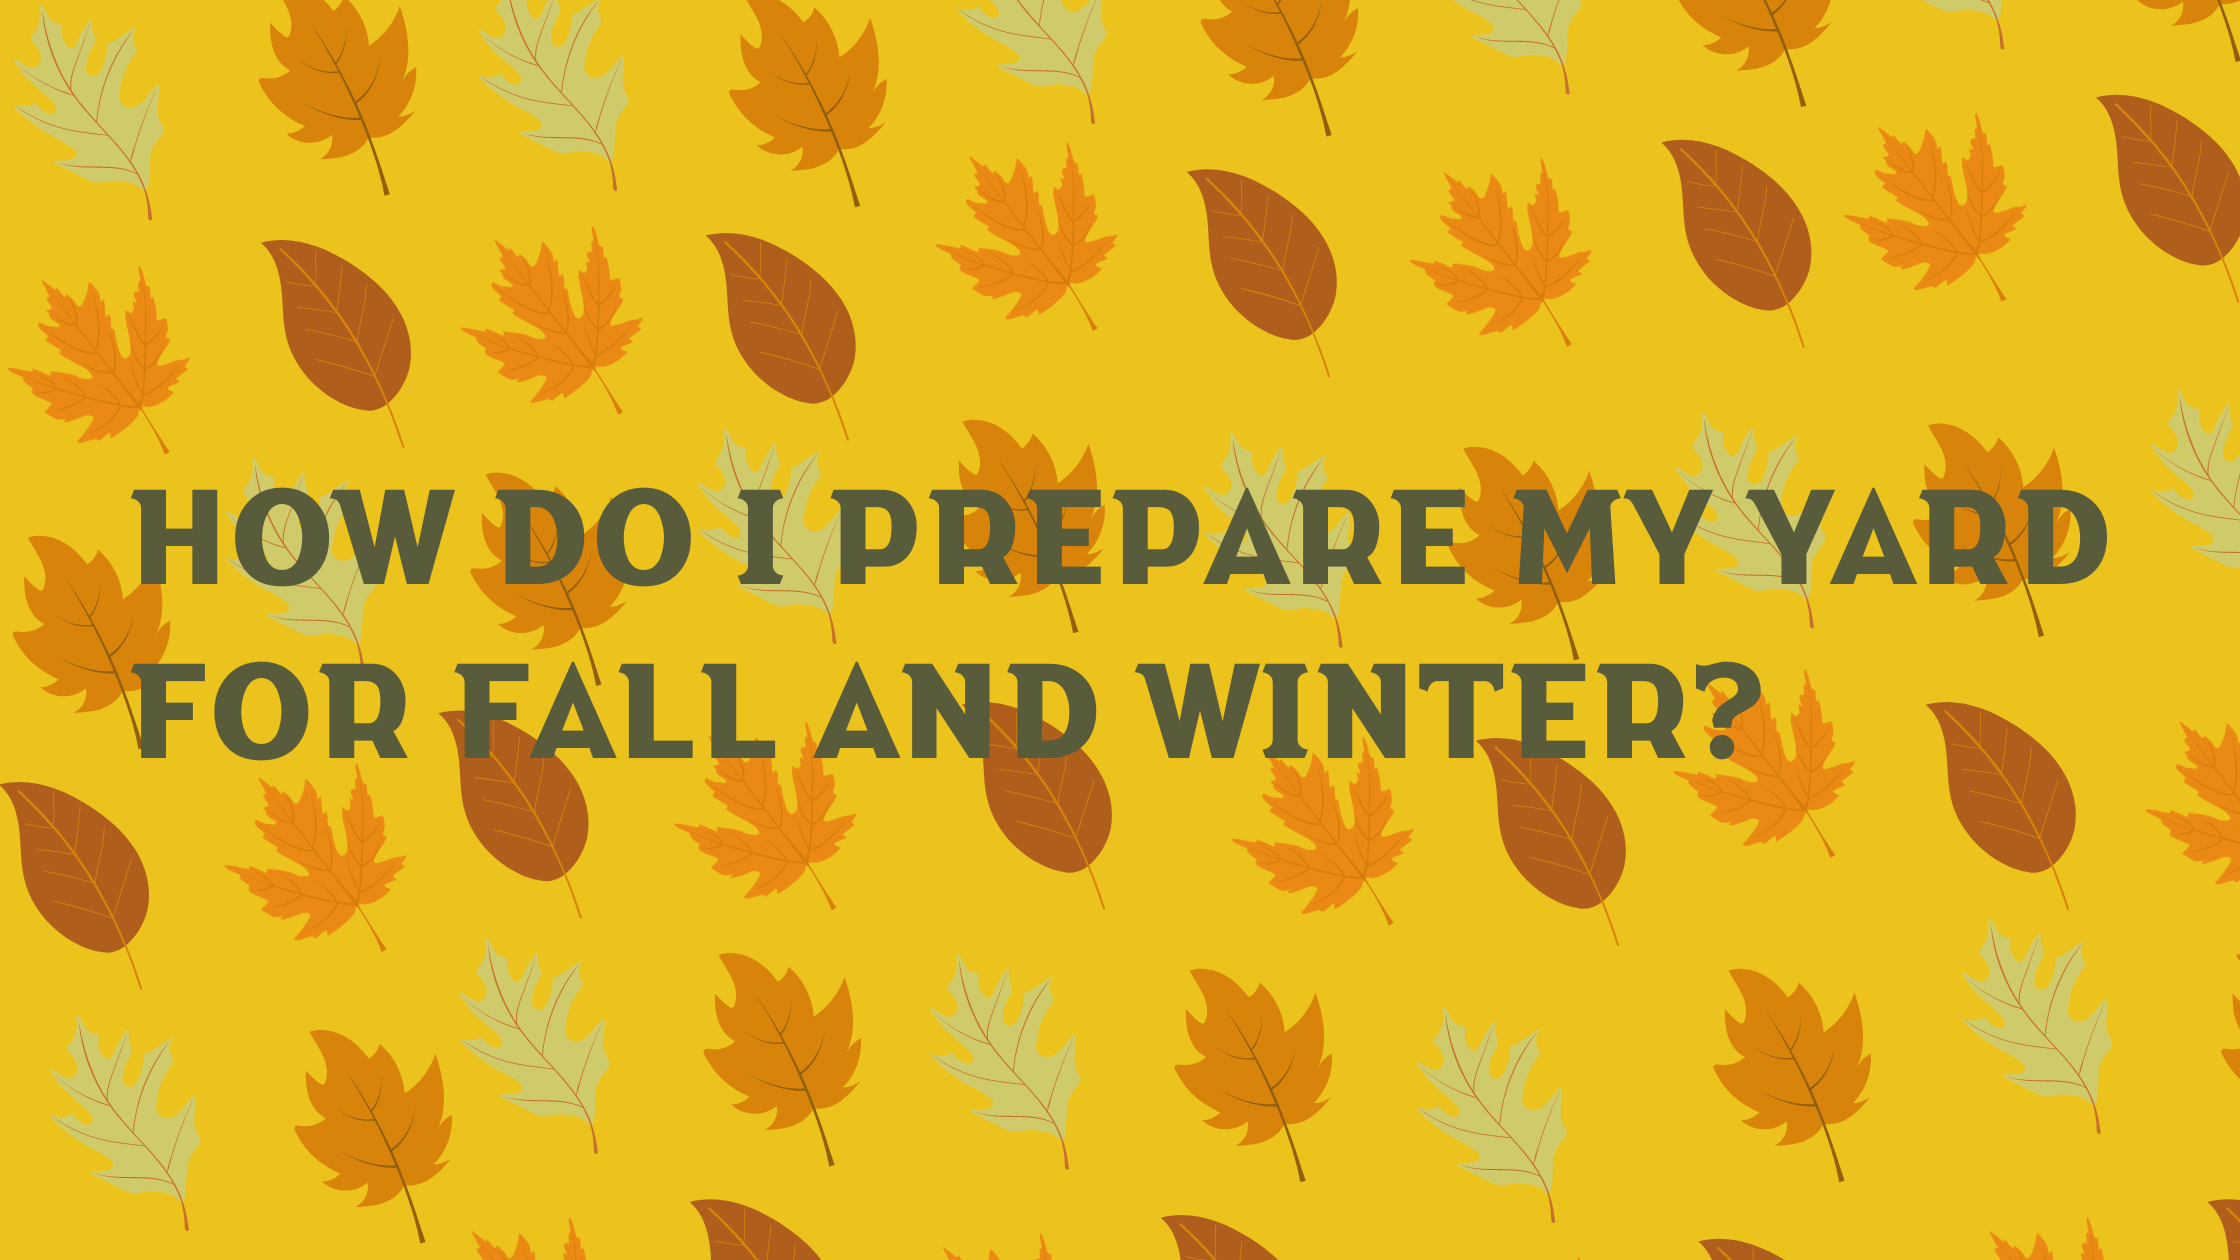 How Do I Prepare My Yard for Fall & Winter?